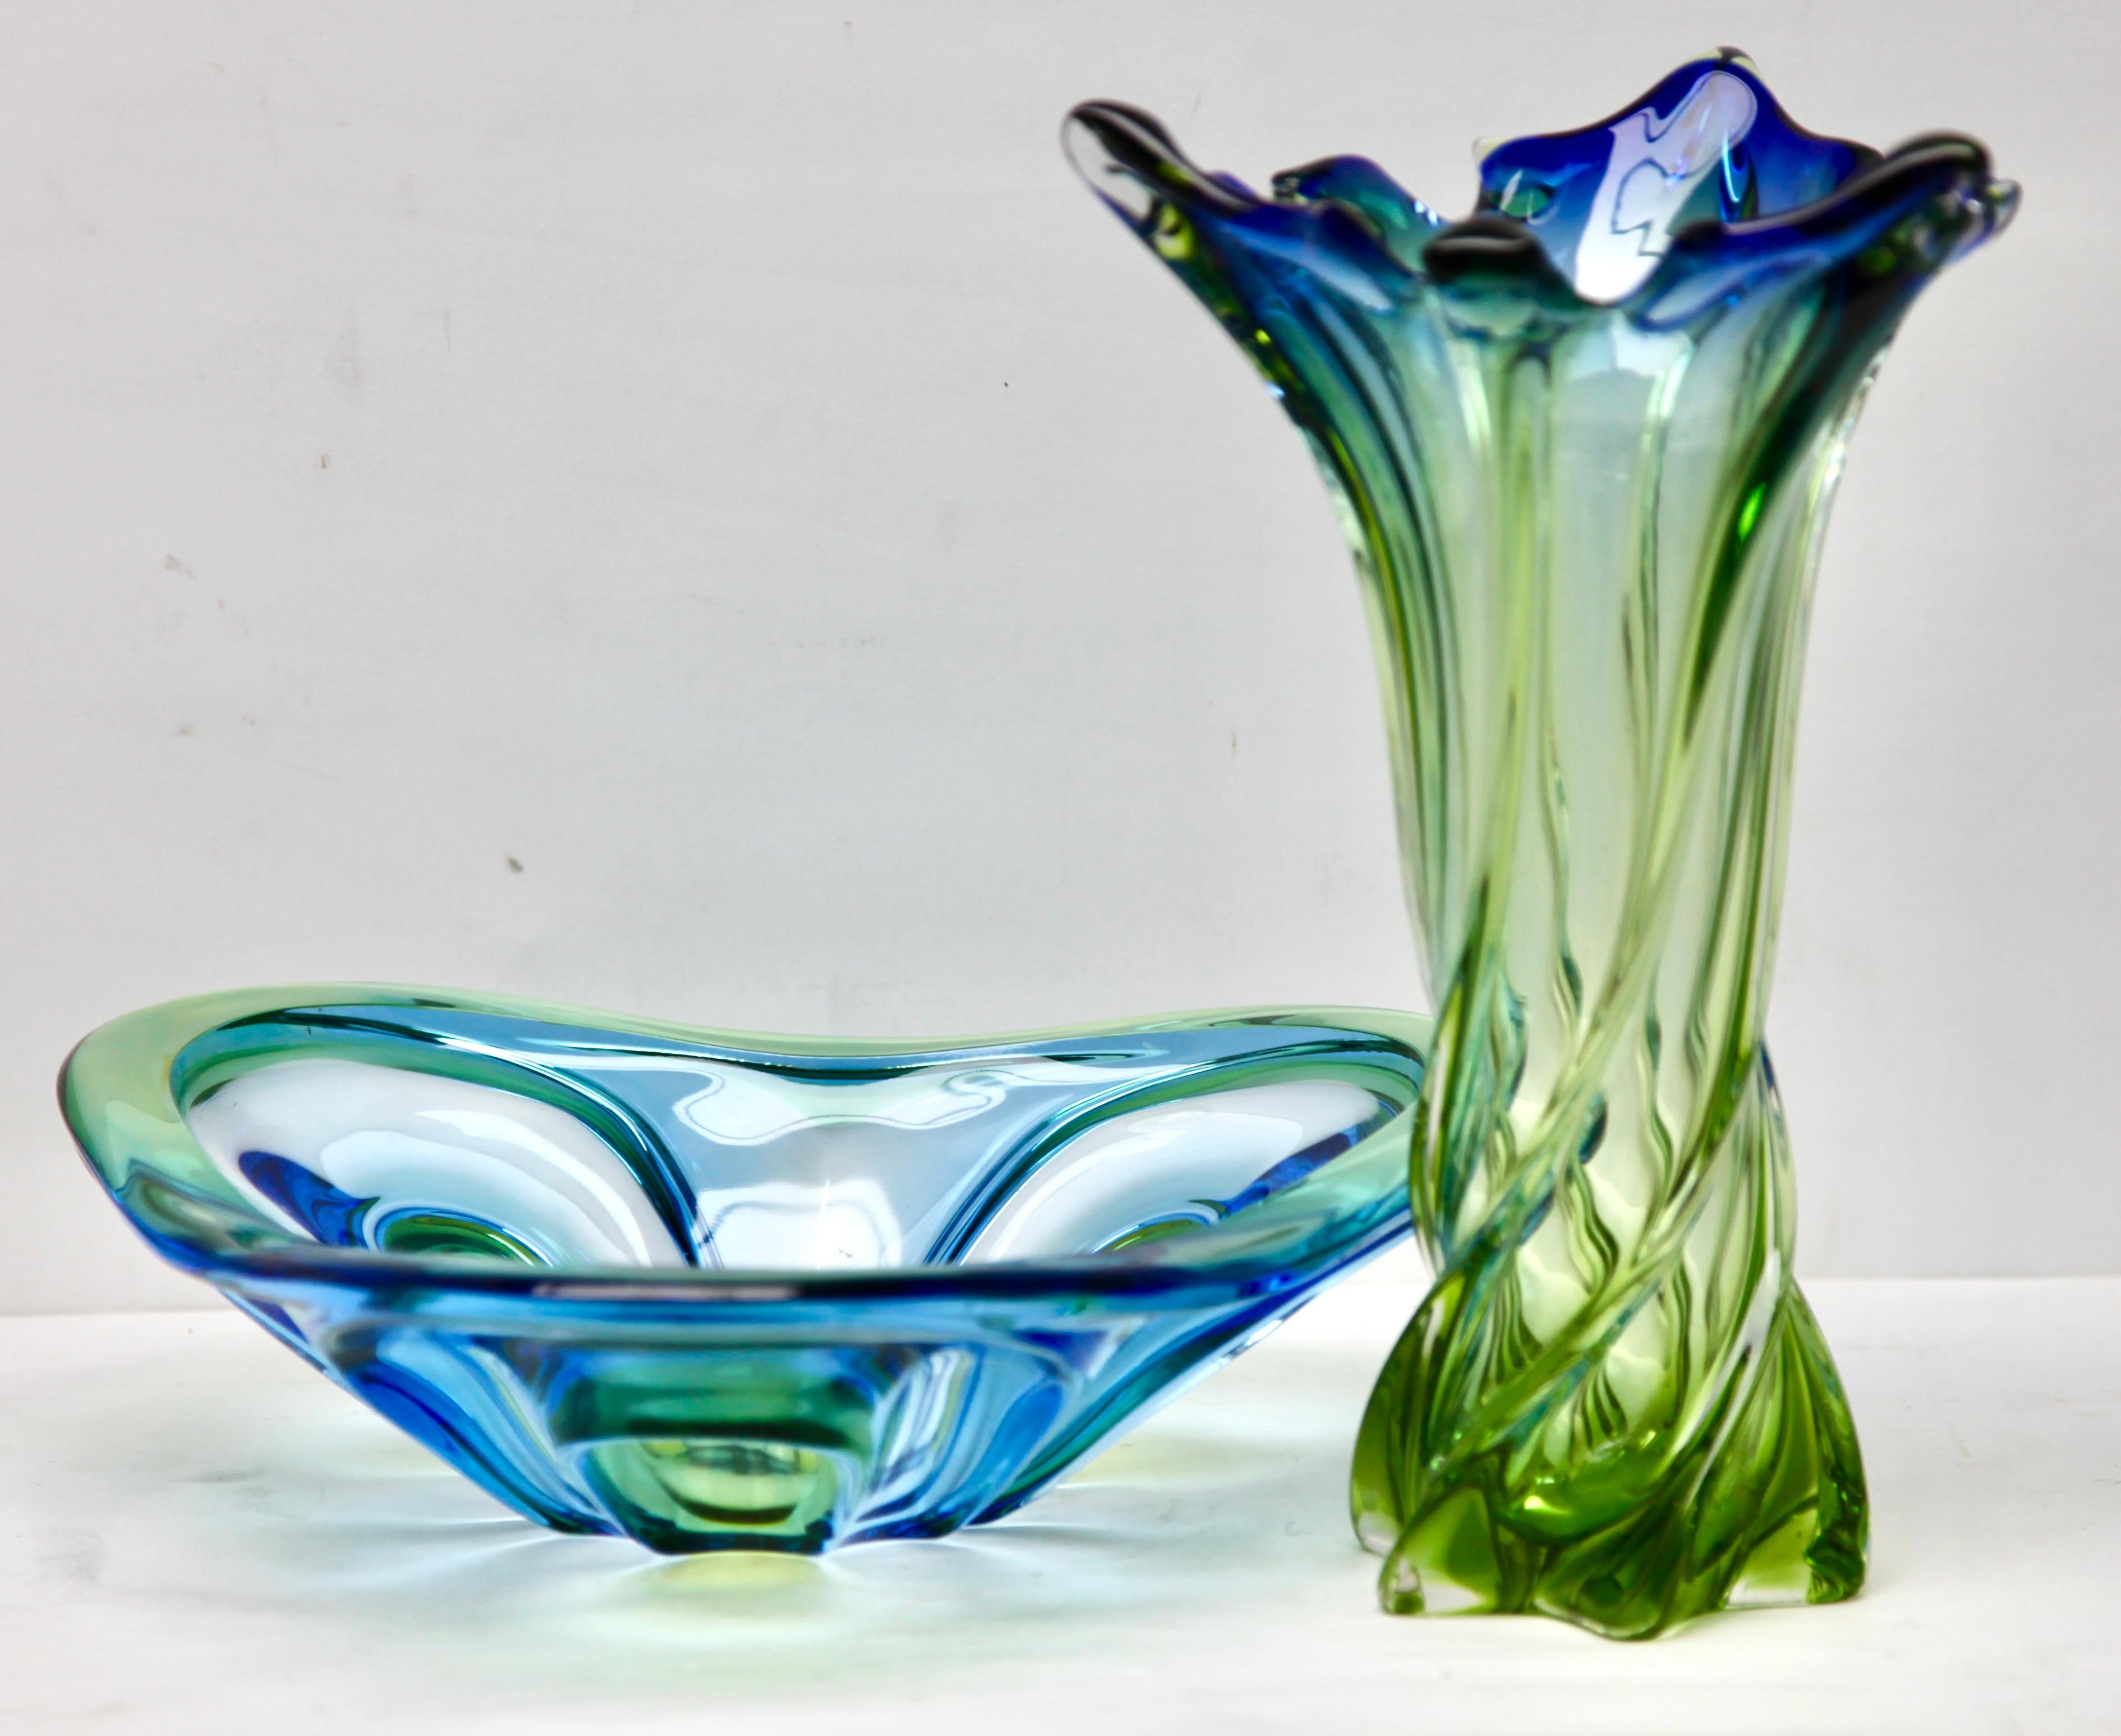 The Chribska glassworks, full name Sklarna Chribska, was founded in the early fifteenth century and stayed in production until very recently. In 1882 it was bought by the Mayer family. Chribska became part of the Borske Sklo National Corporation